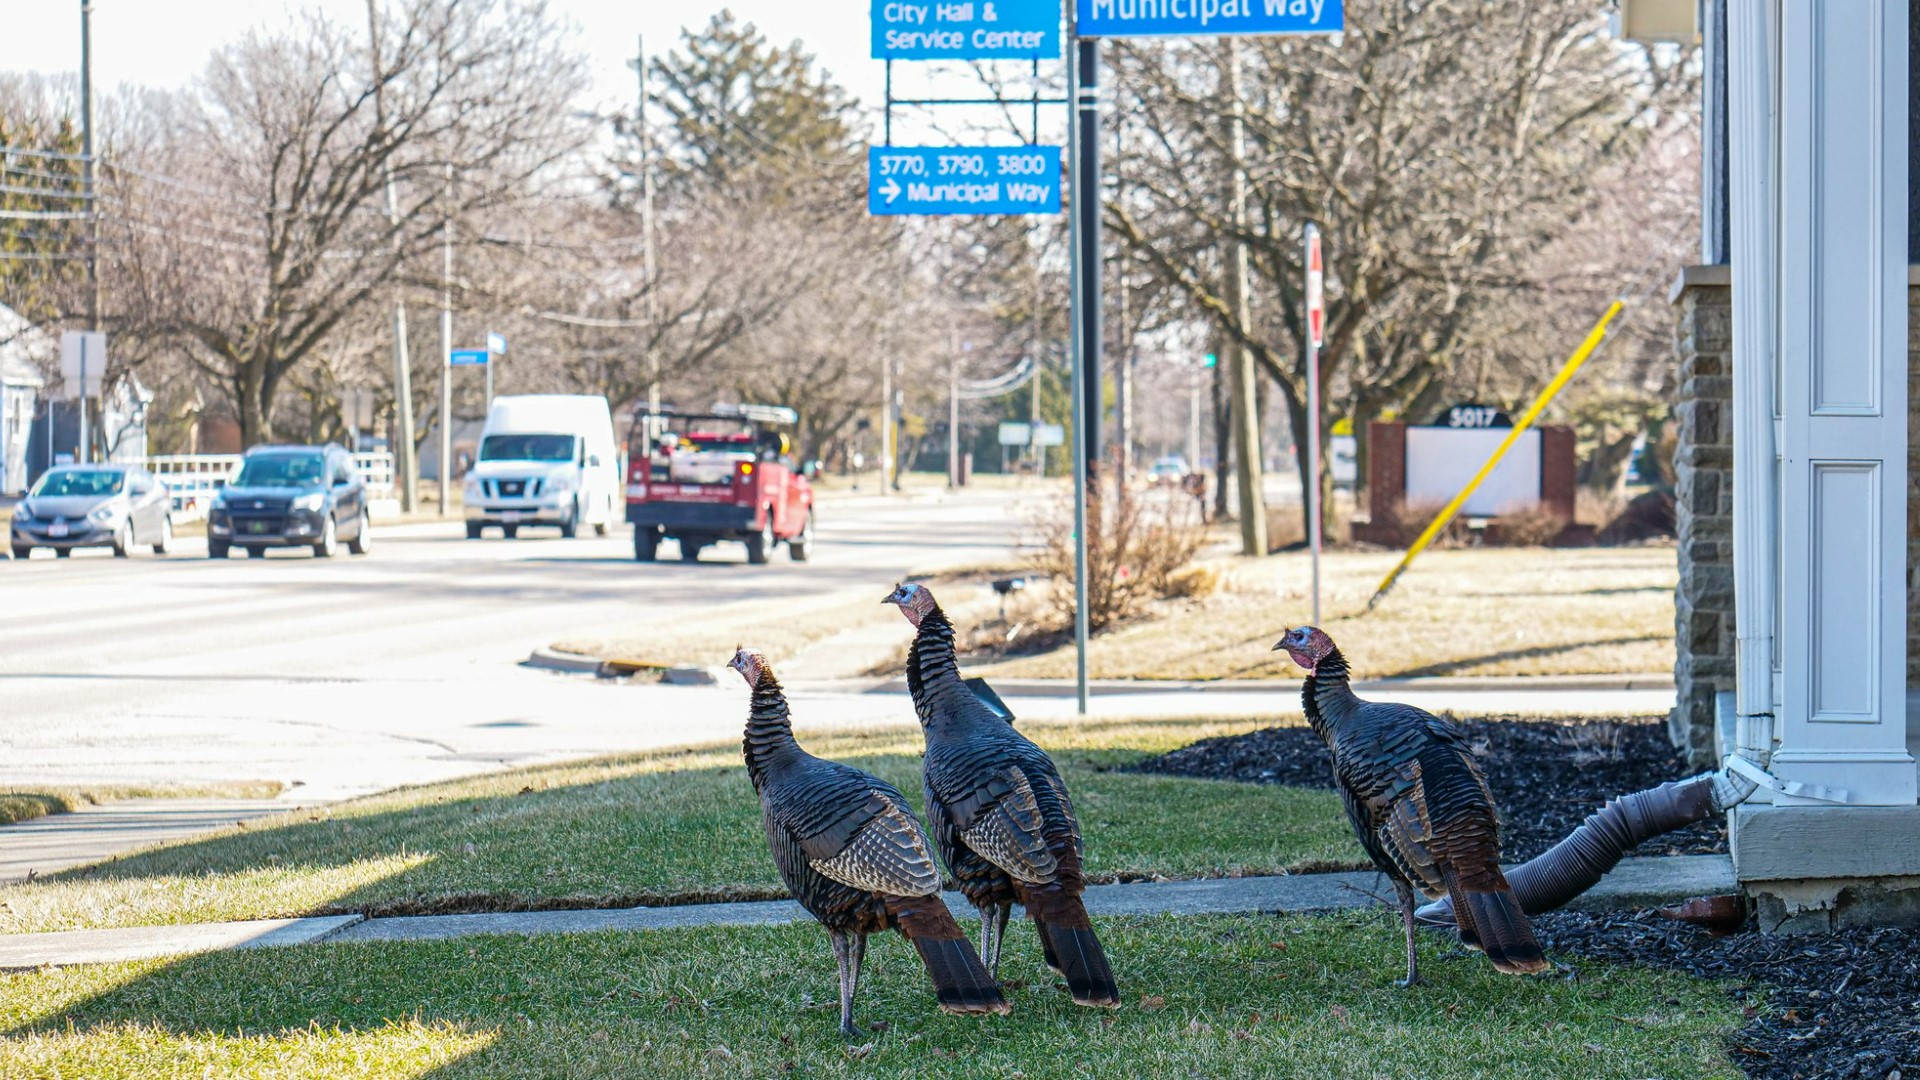 The turkeys, known as the “Hilliard Turkey Gang," have been running around neighborhoods in the city for about a year.